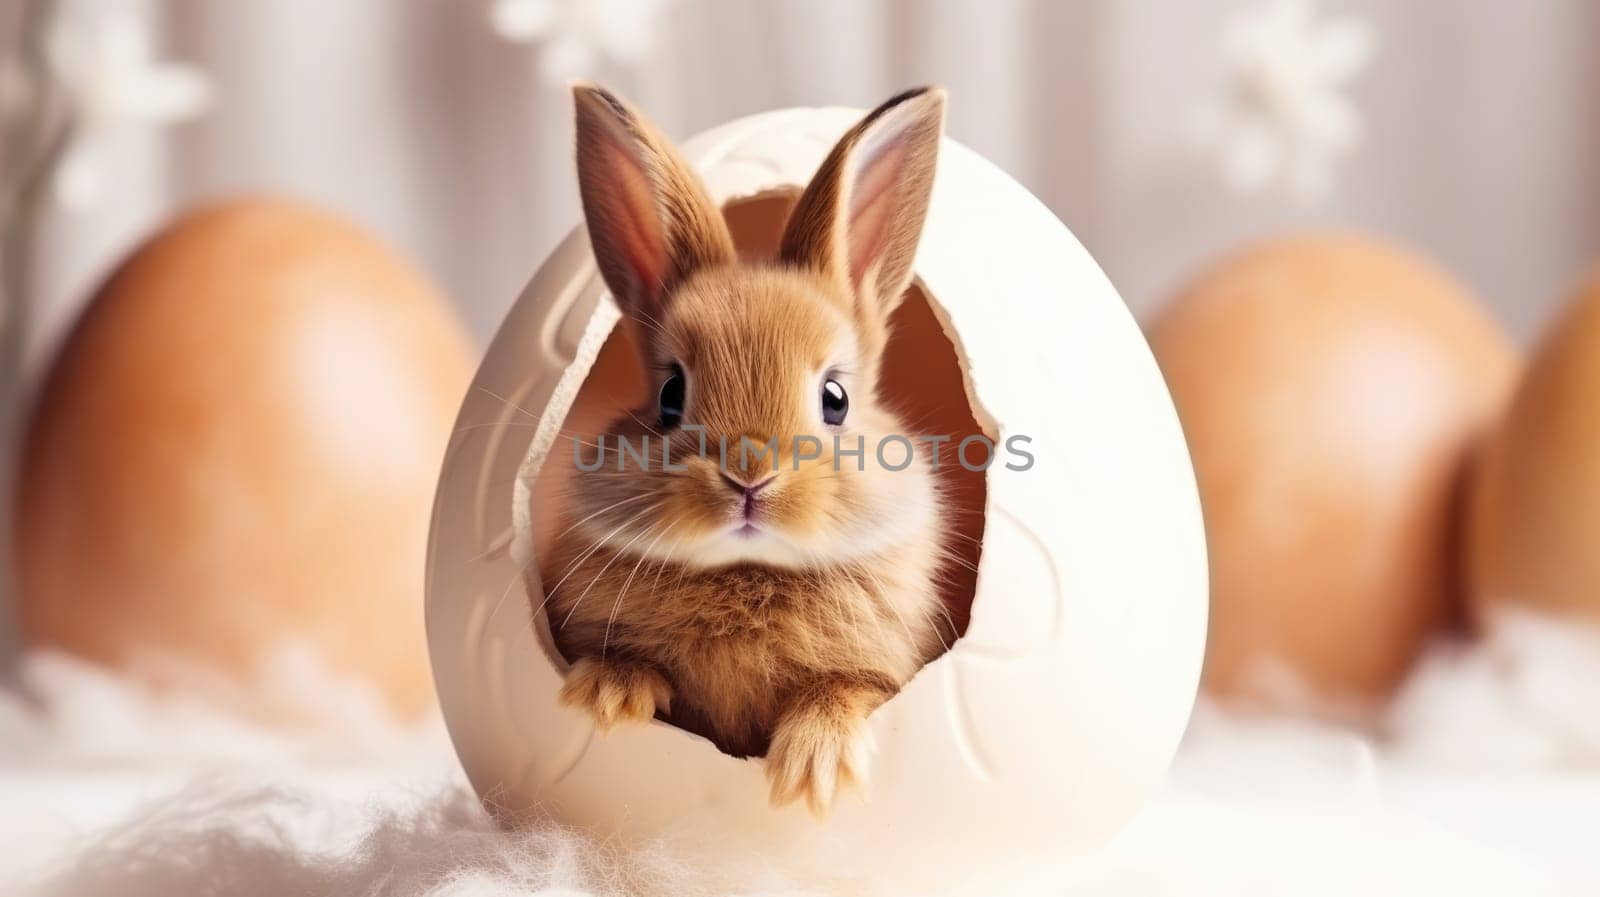 A cute baby rabbit in a broken eggshell, perfect for Easter projects. The rabbits ears are perked up and eyes wide open, looking out of the shell on a white background.